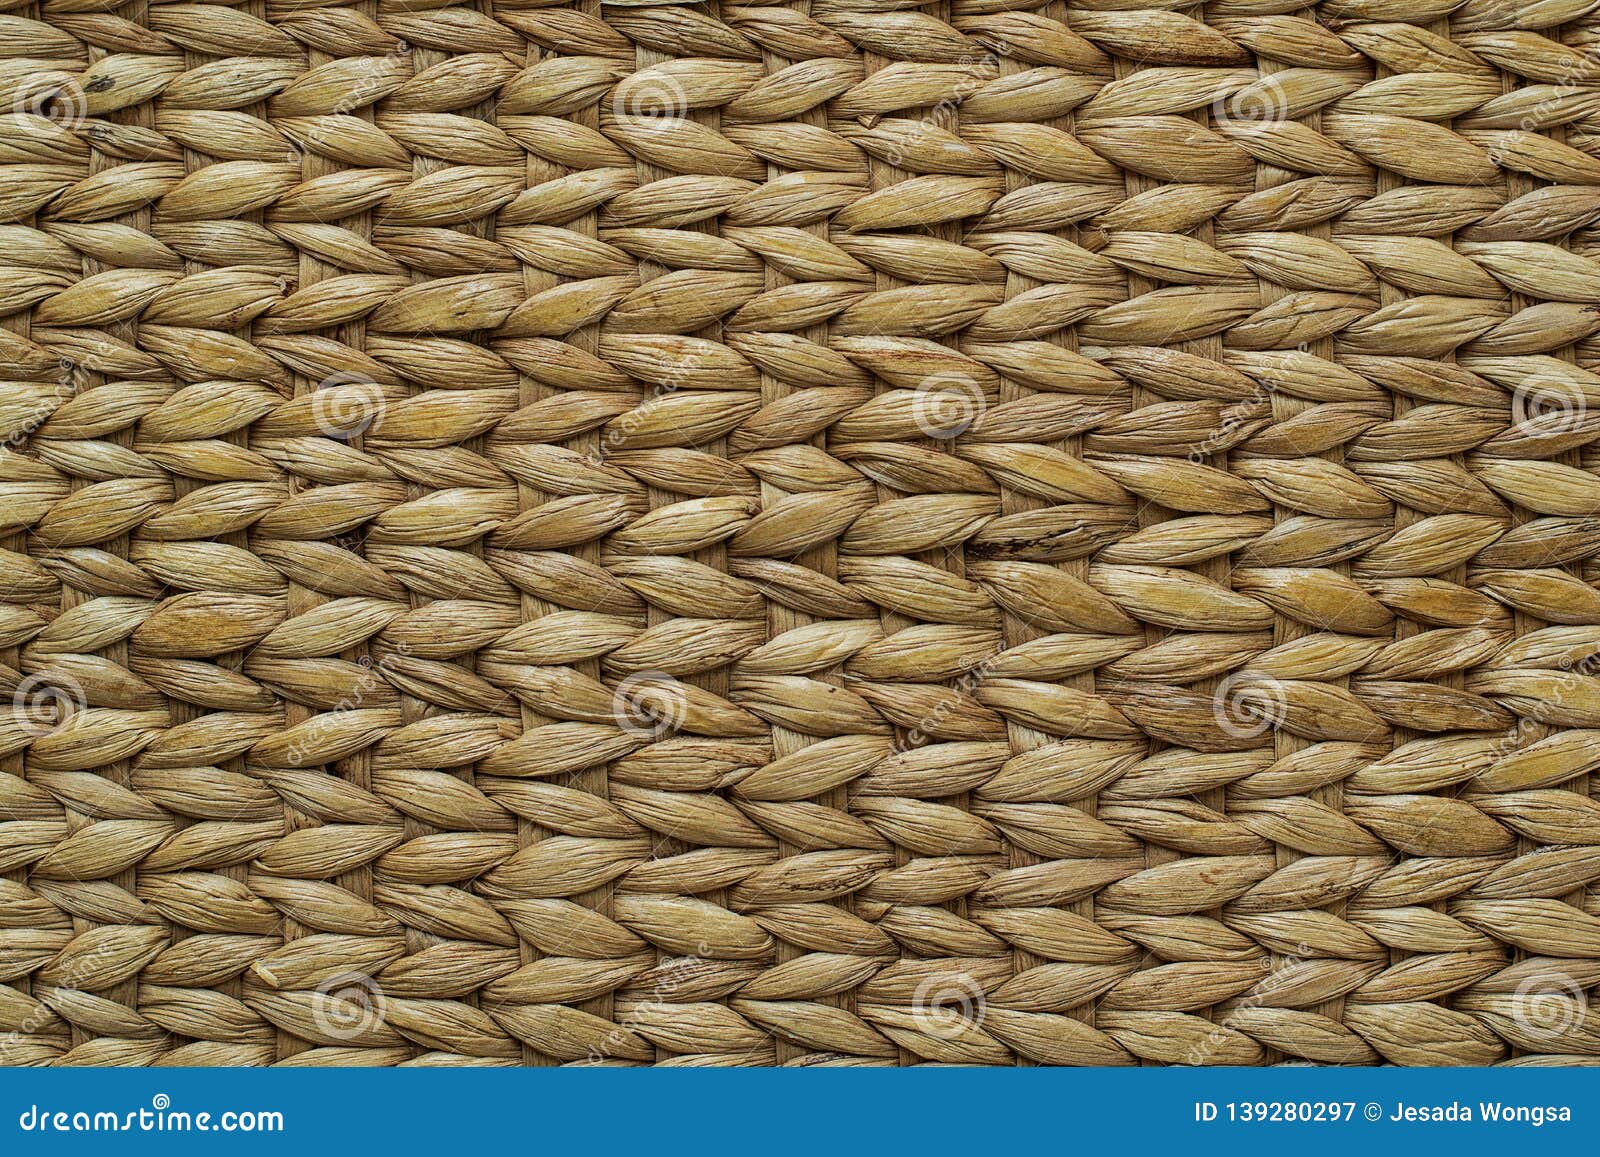 Papyrus Rattan Weave Texture from Handmade High Resolution Background ...